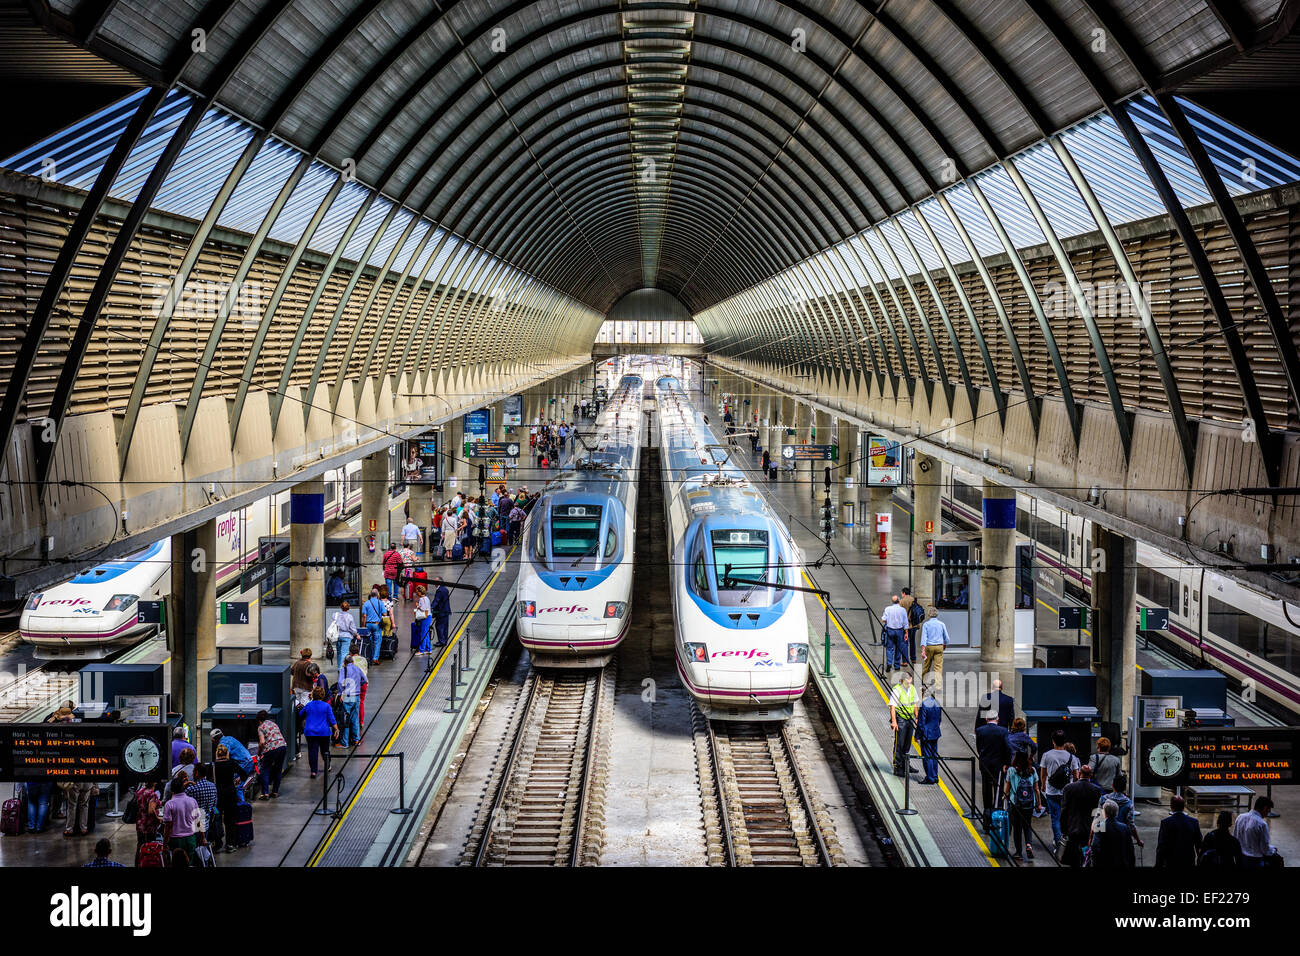 Passengers and trains at Santa Justa Station in Seville, Spain. Stock Photo